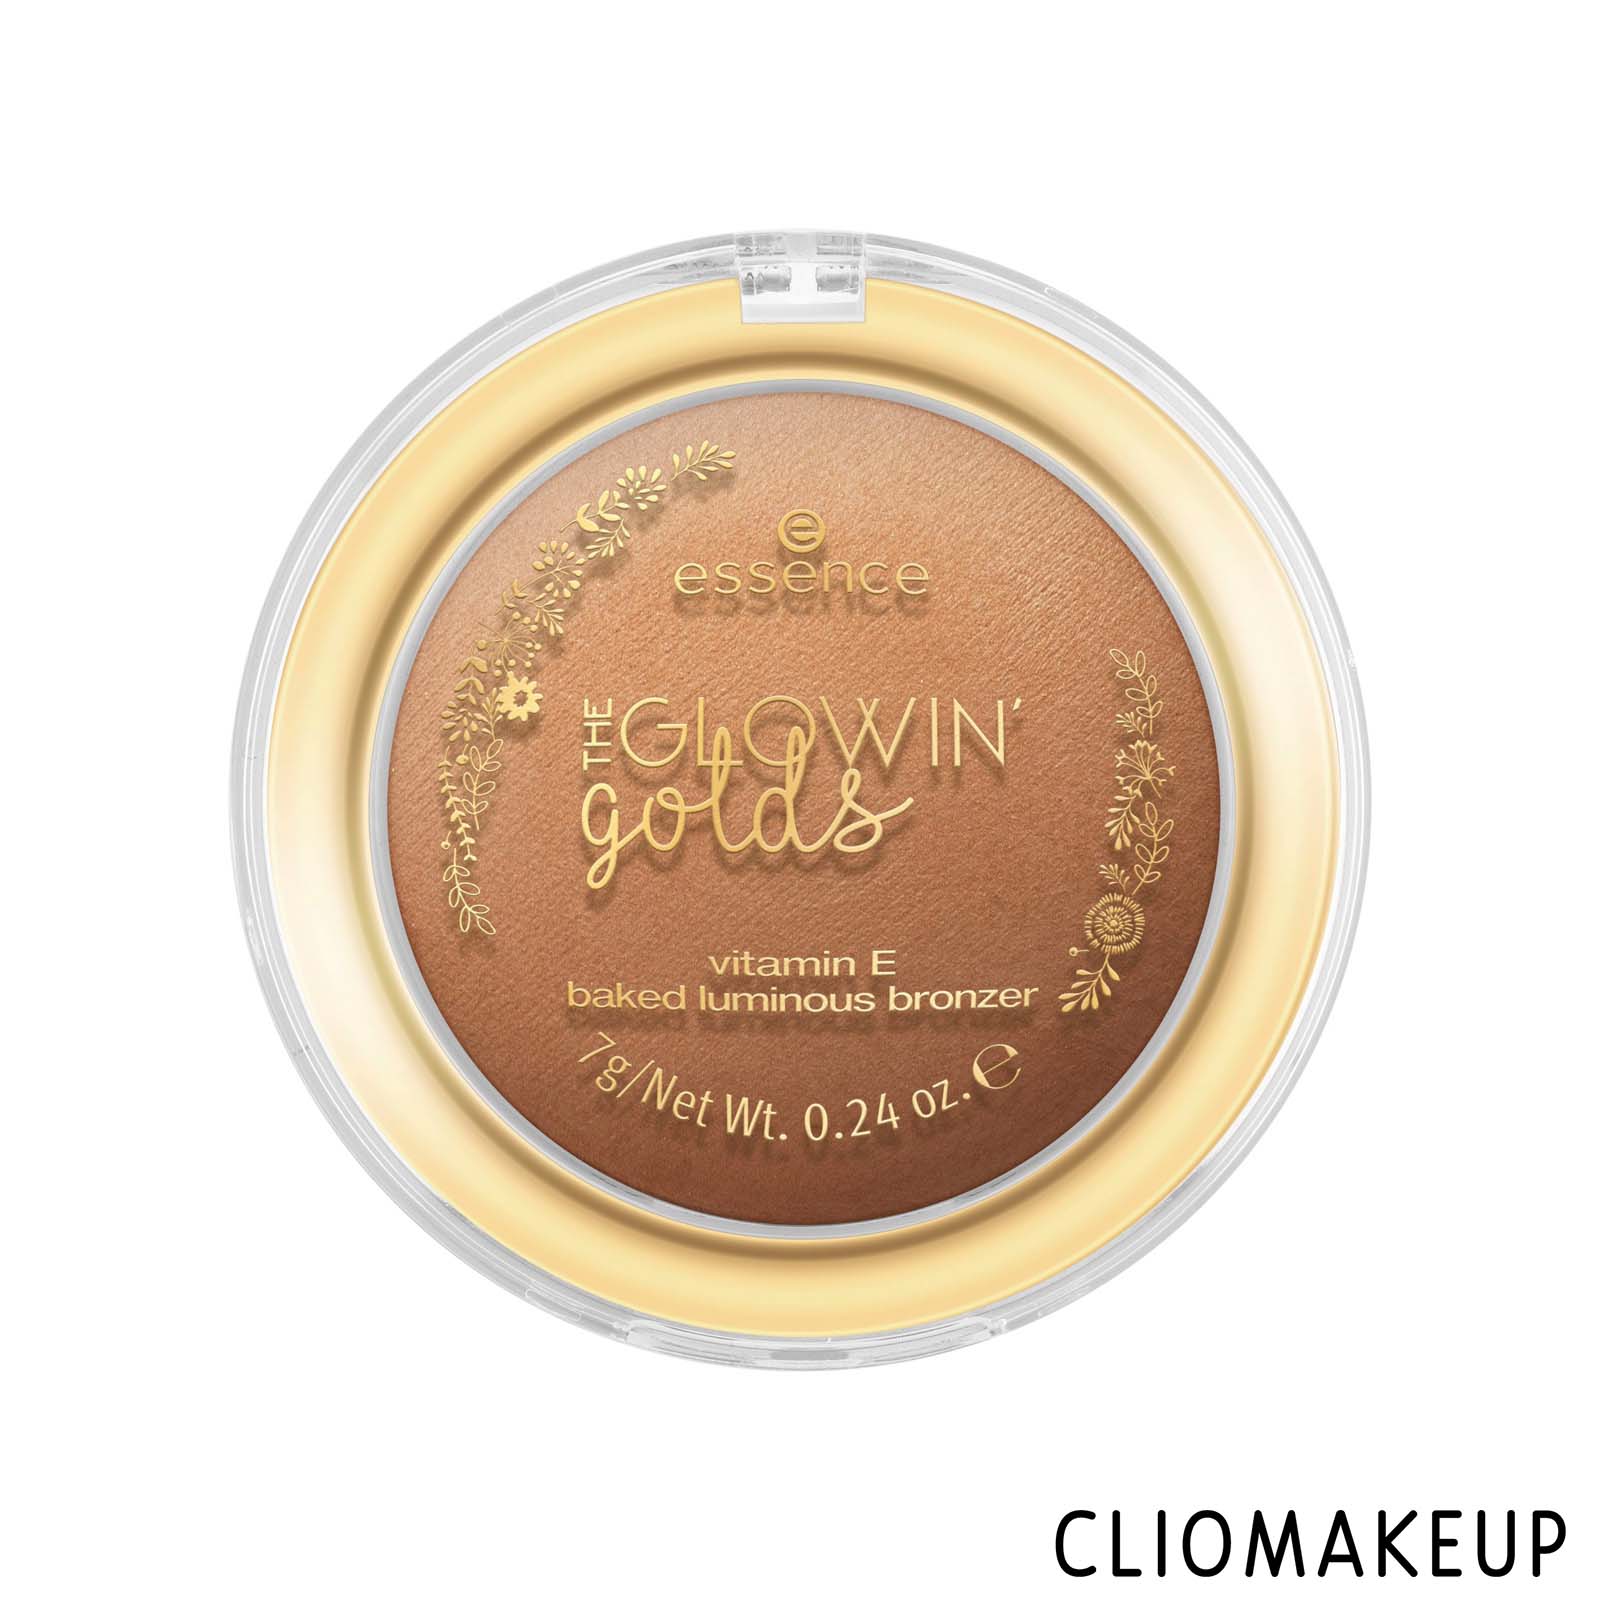 Recensione Bronzer Essence The Glowing Golds Vitamin E Baked